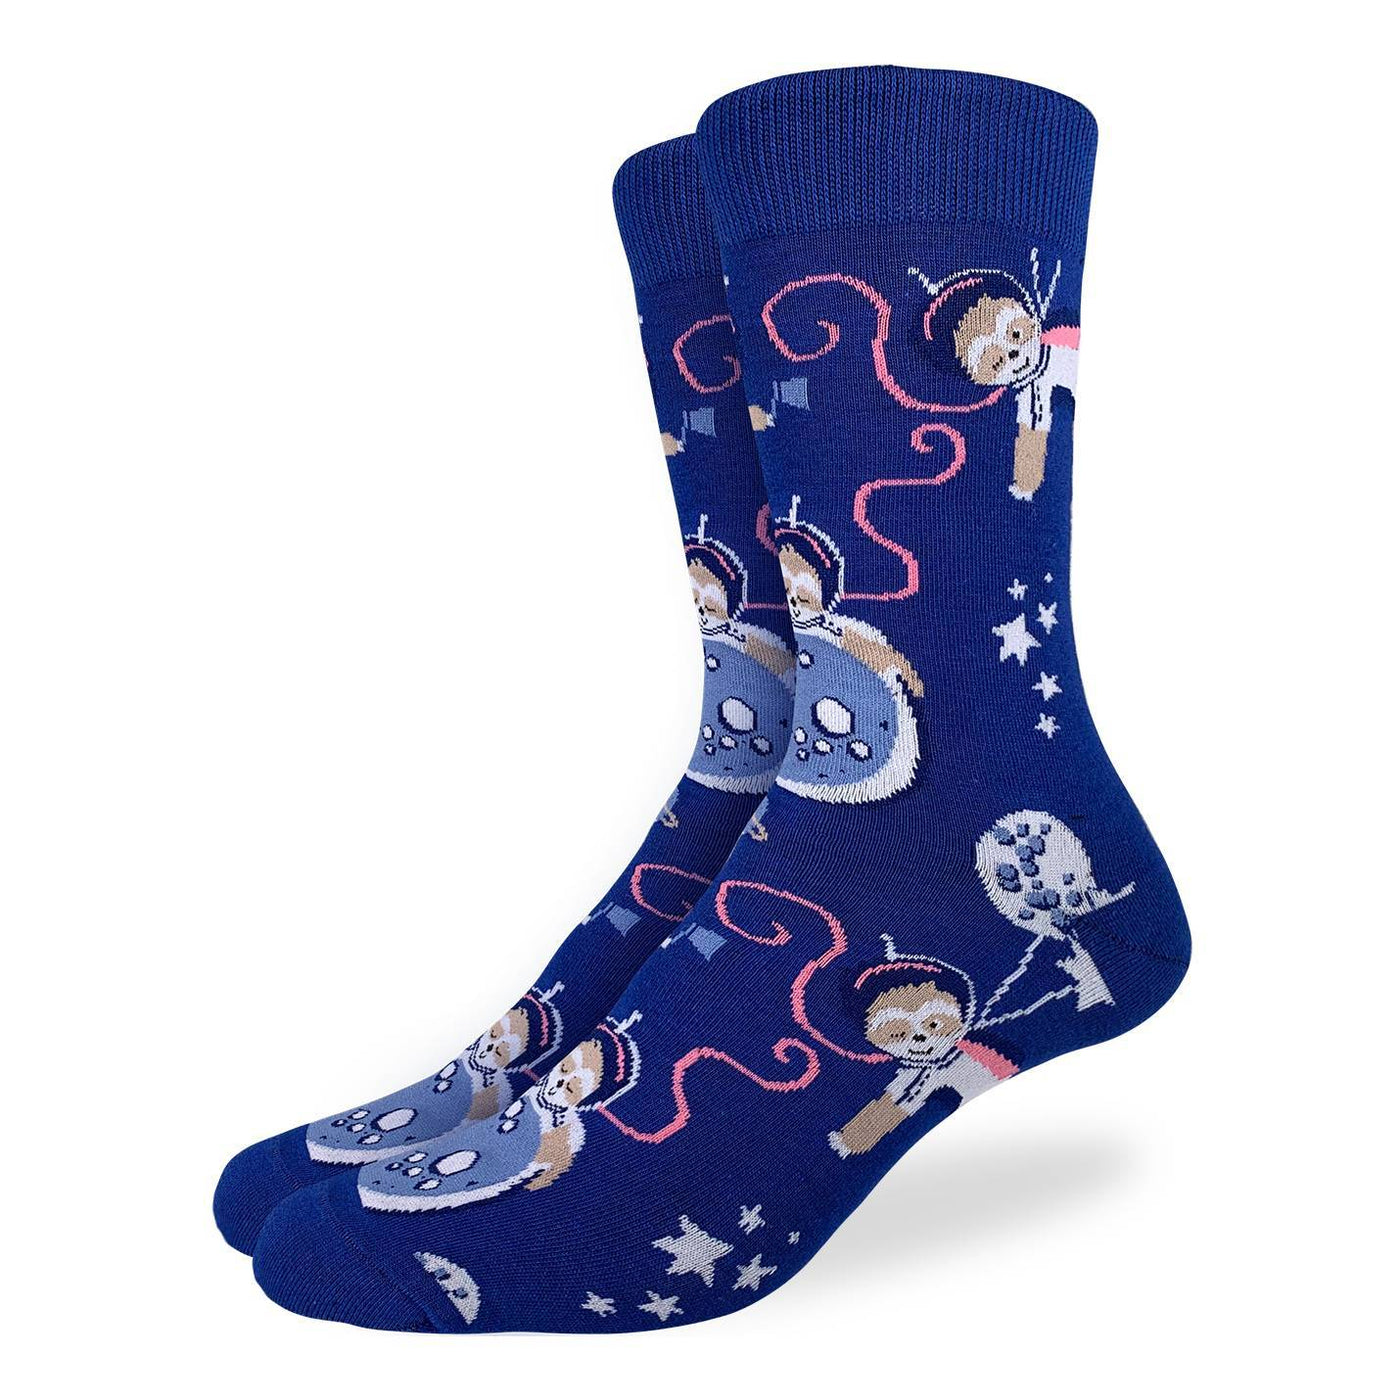 "Space Sloth" Cotton Crew Socks by Good Luck Sock - Large